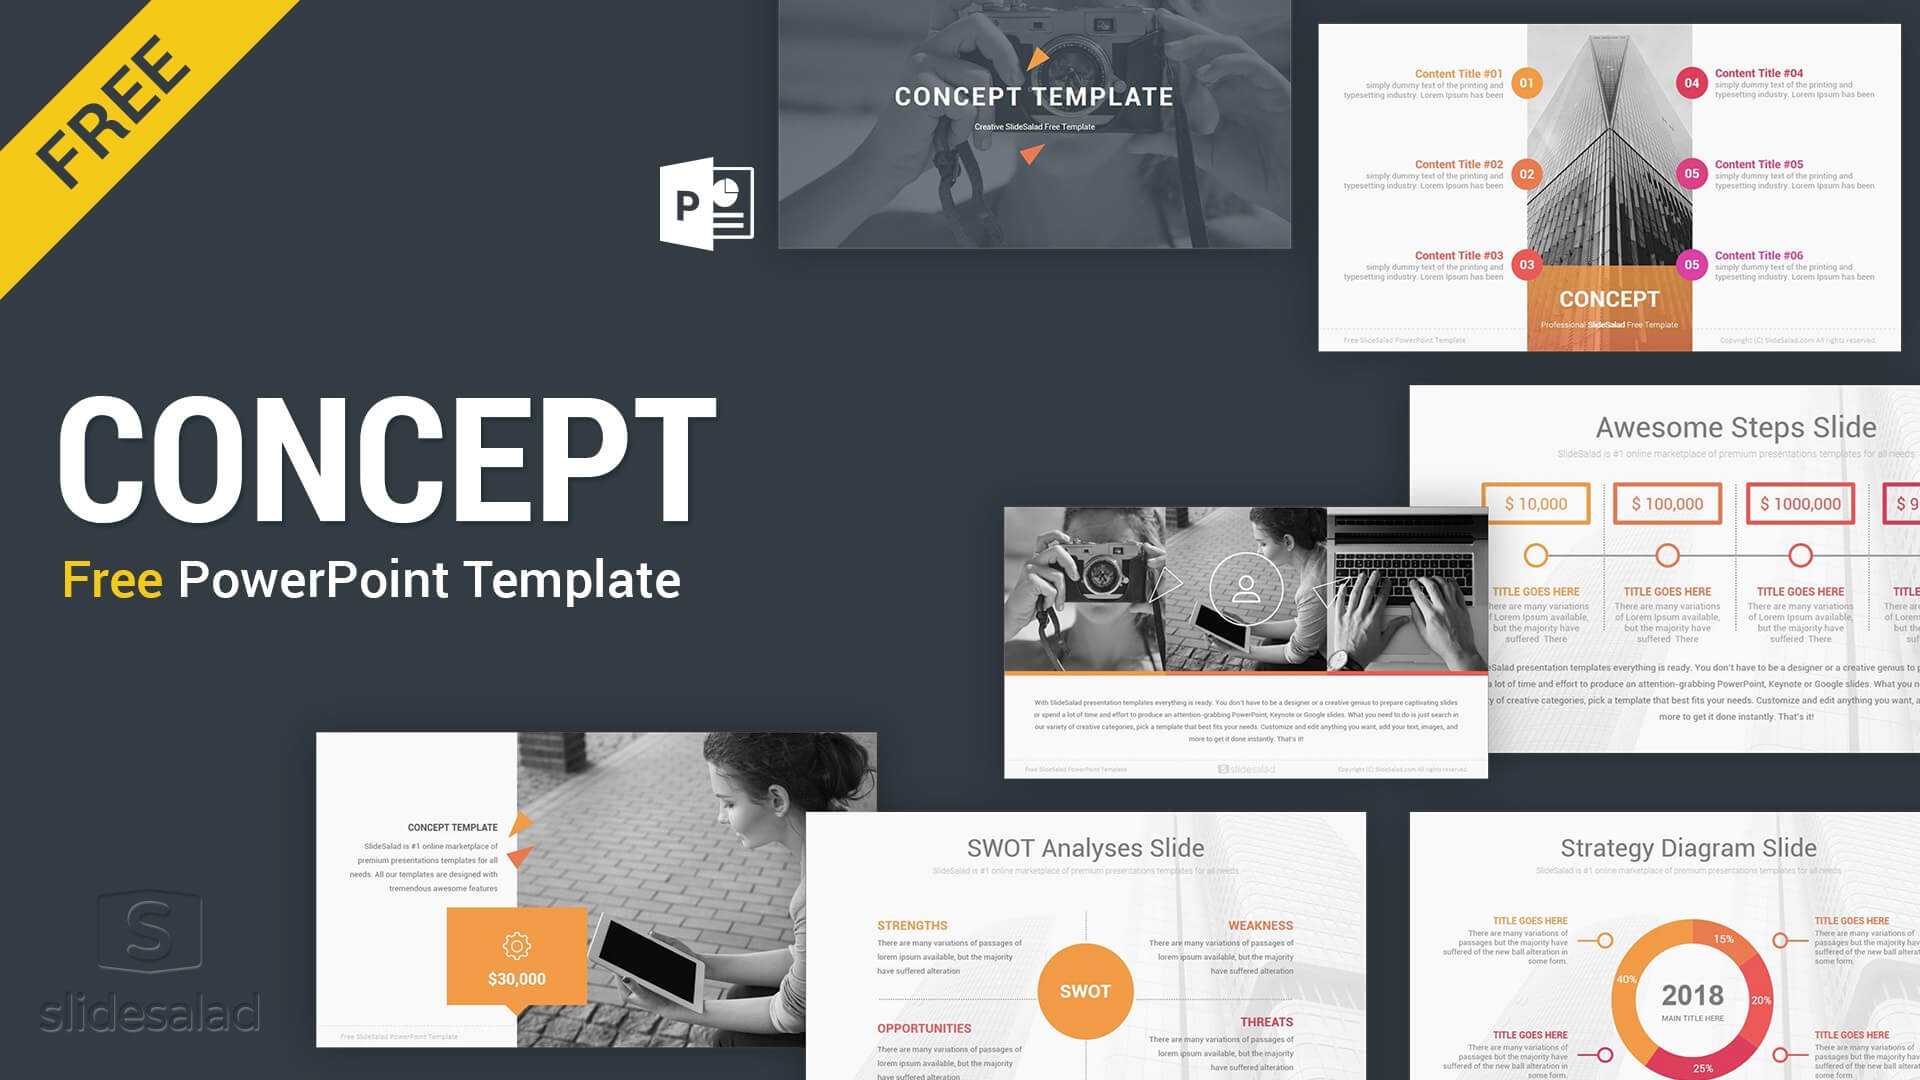 Best Free Presentation Templates Professional Designs 2019 Inside Virus Powerpoint Template Free Download